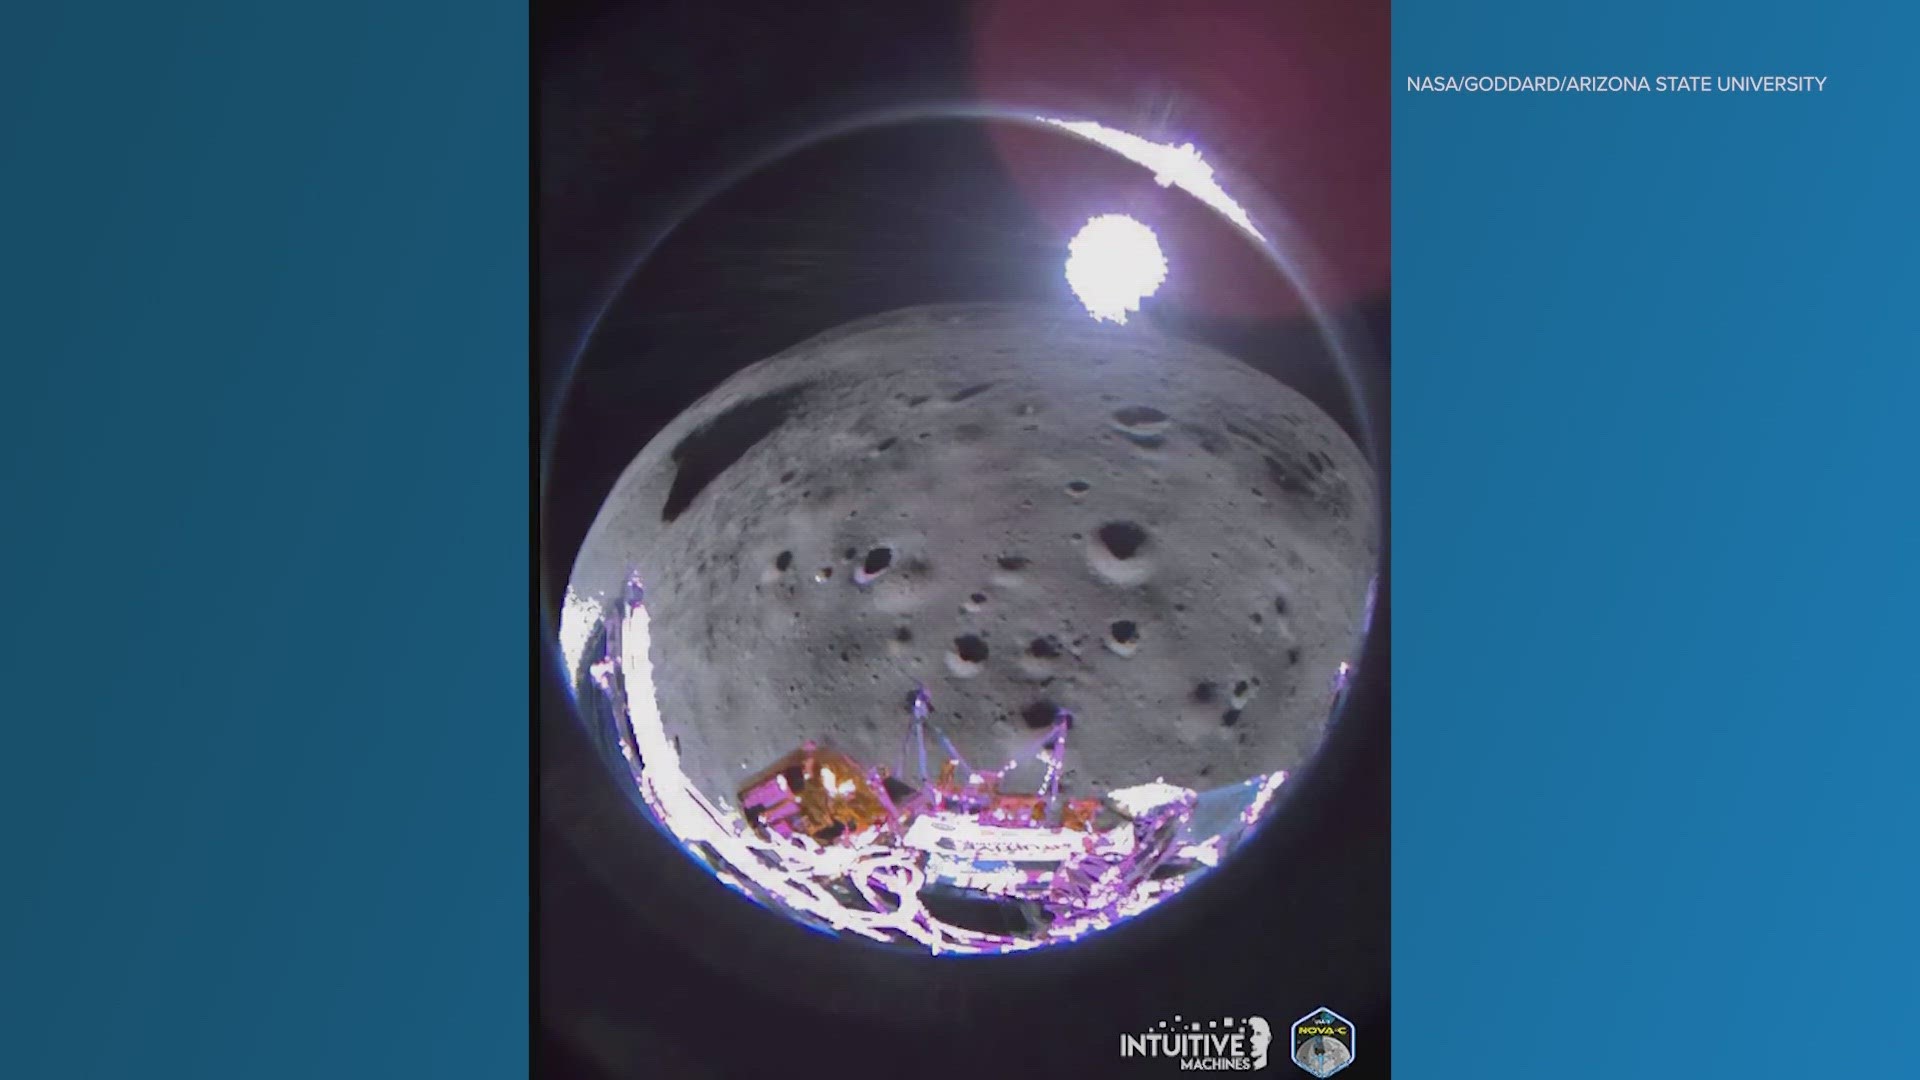 Intuitive Machines said the lander captured the image approximately 35 seconds after pitching over during its approach to the landing site.